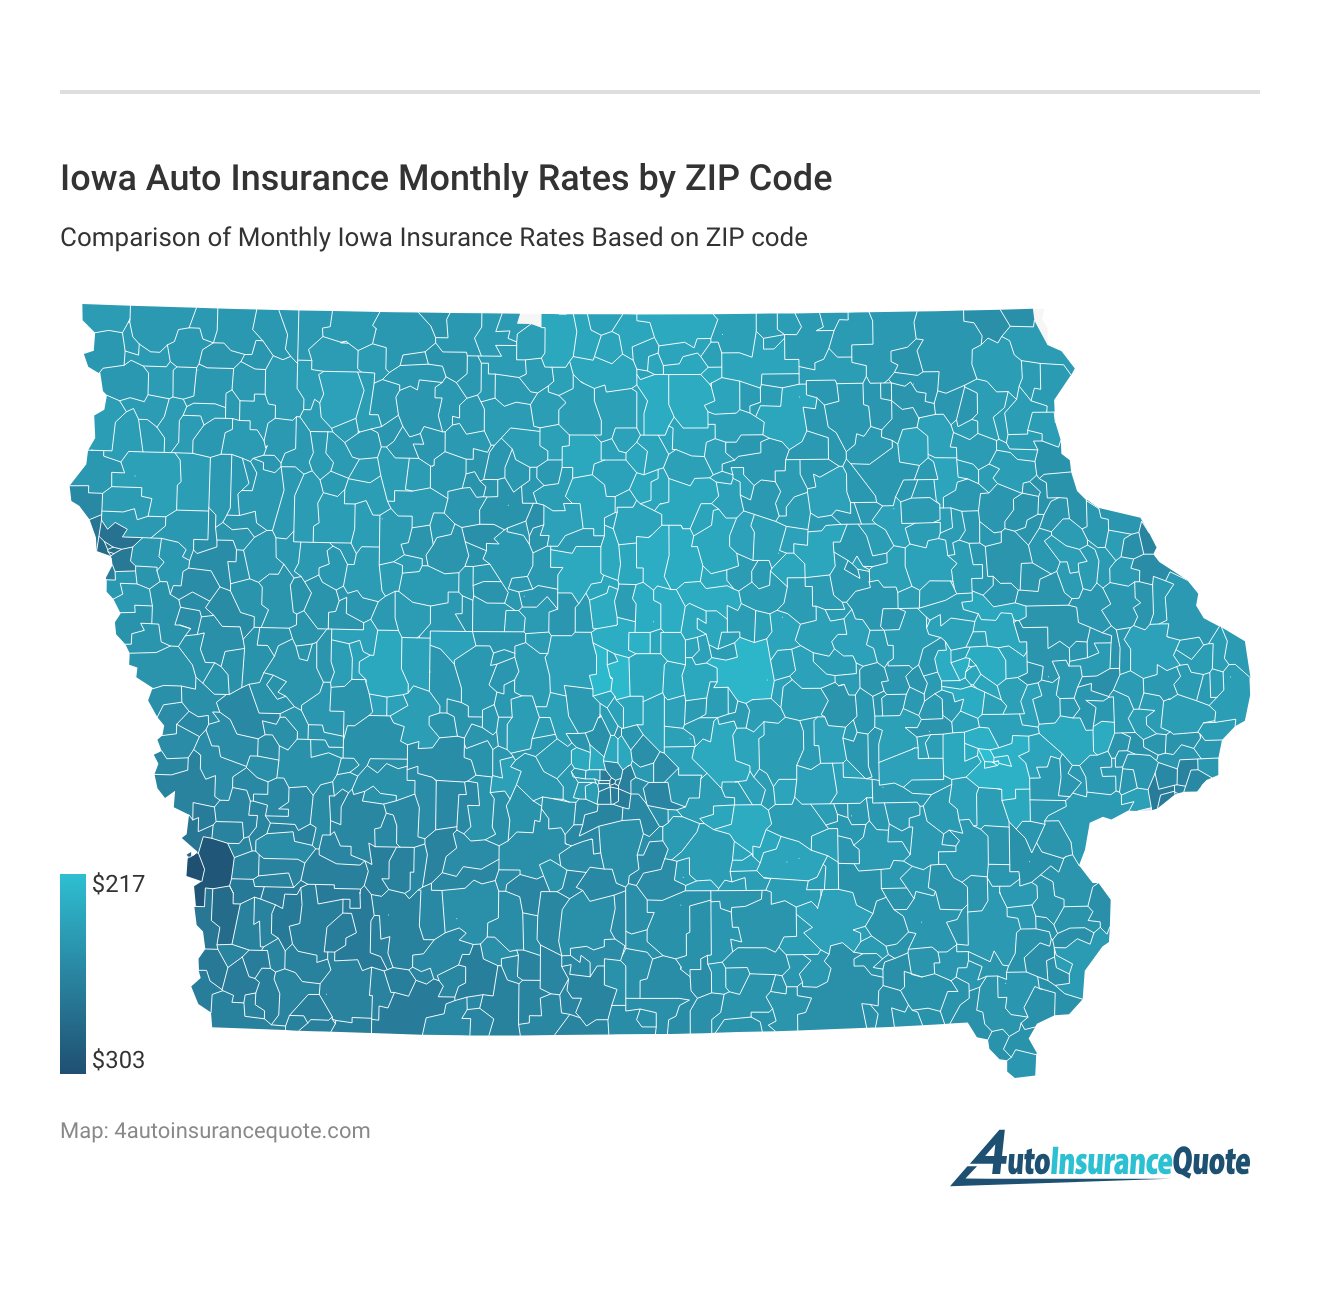 Iowa Auto Insurance Monthly Rates by ZIP Code